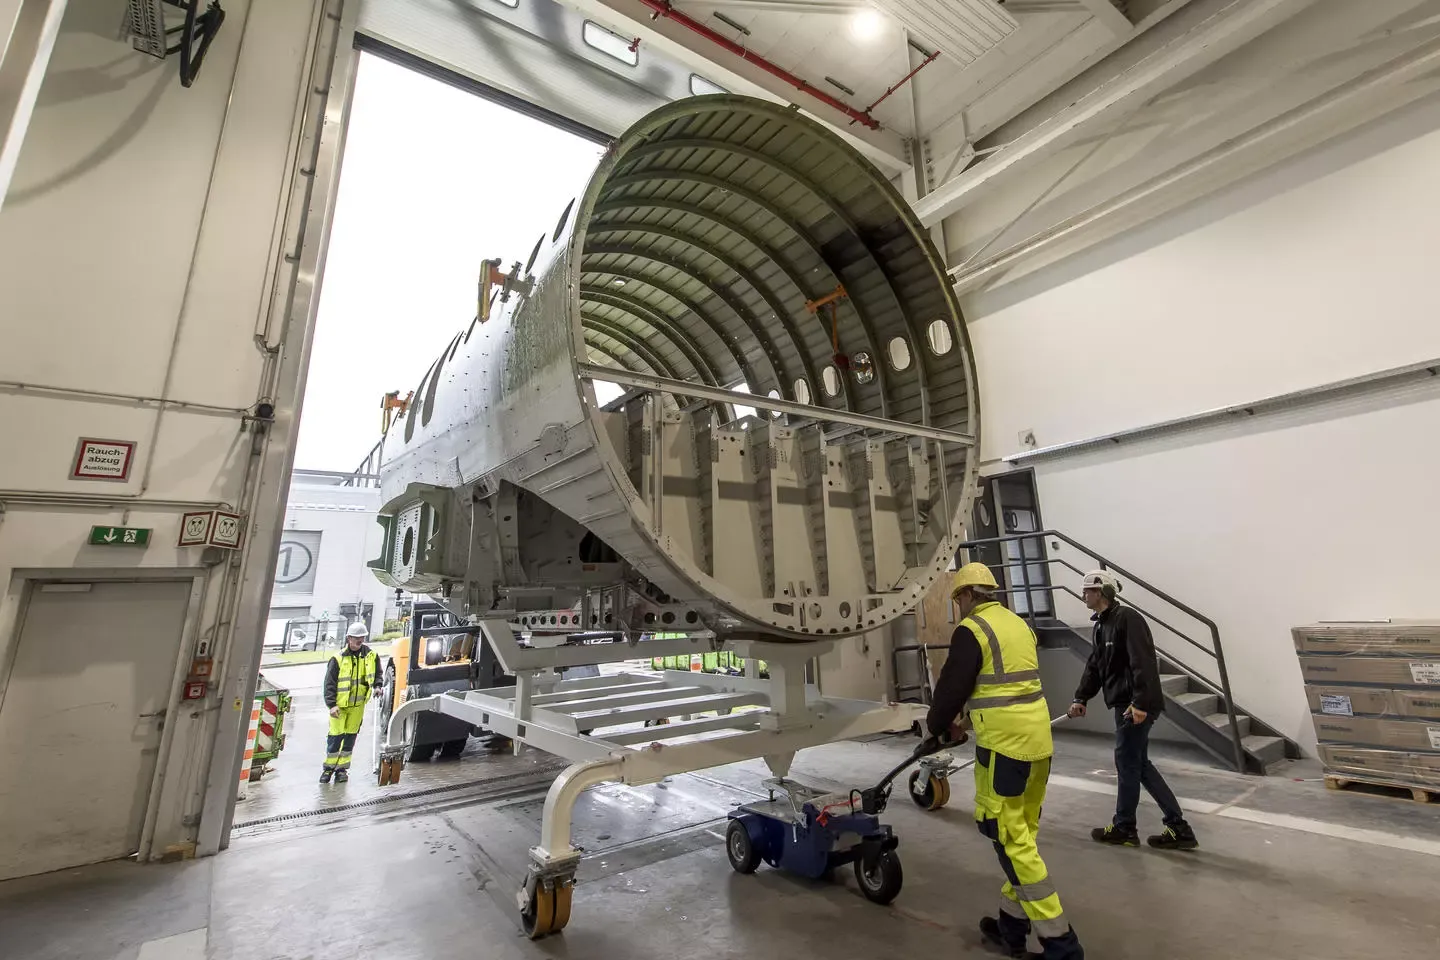 A Fuselage being moved to a new hangar at the Airbus factory.